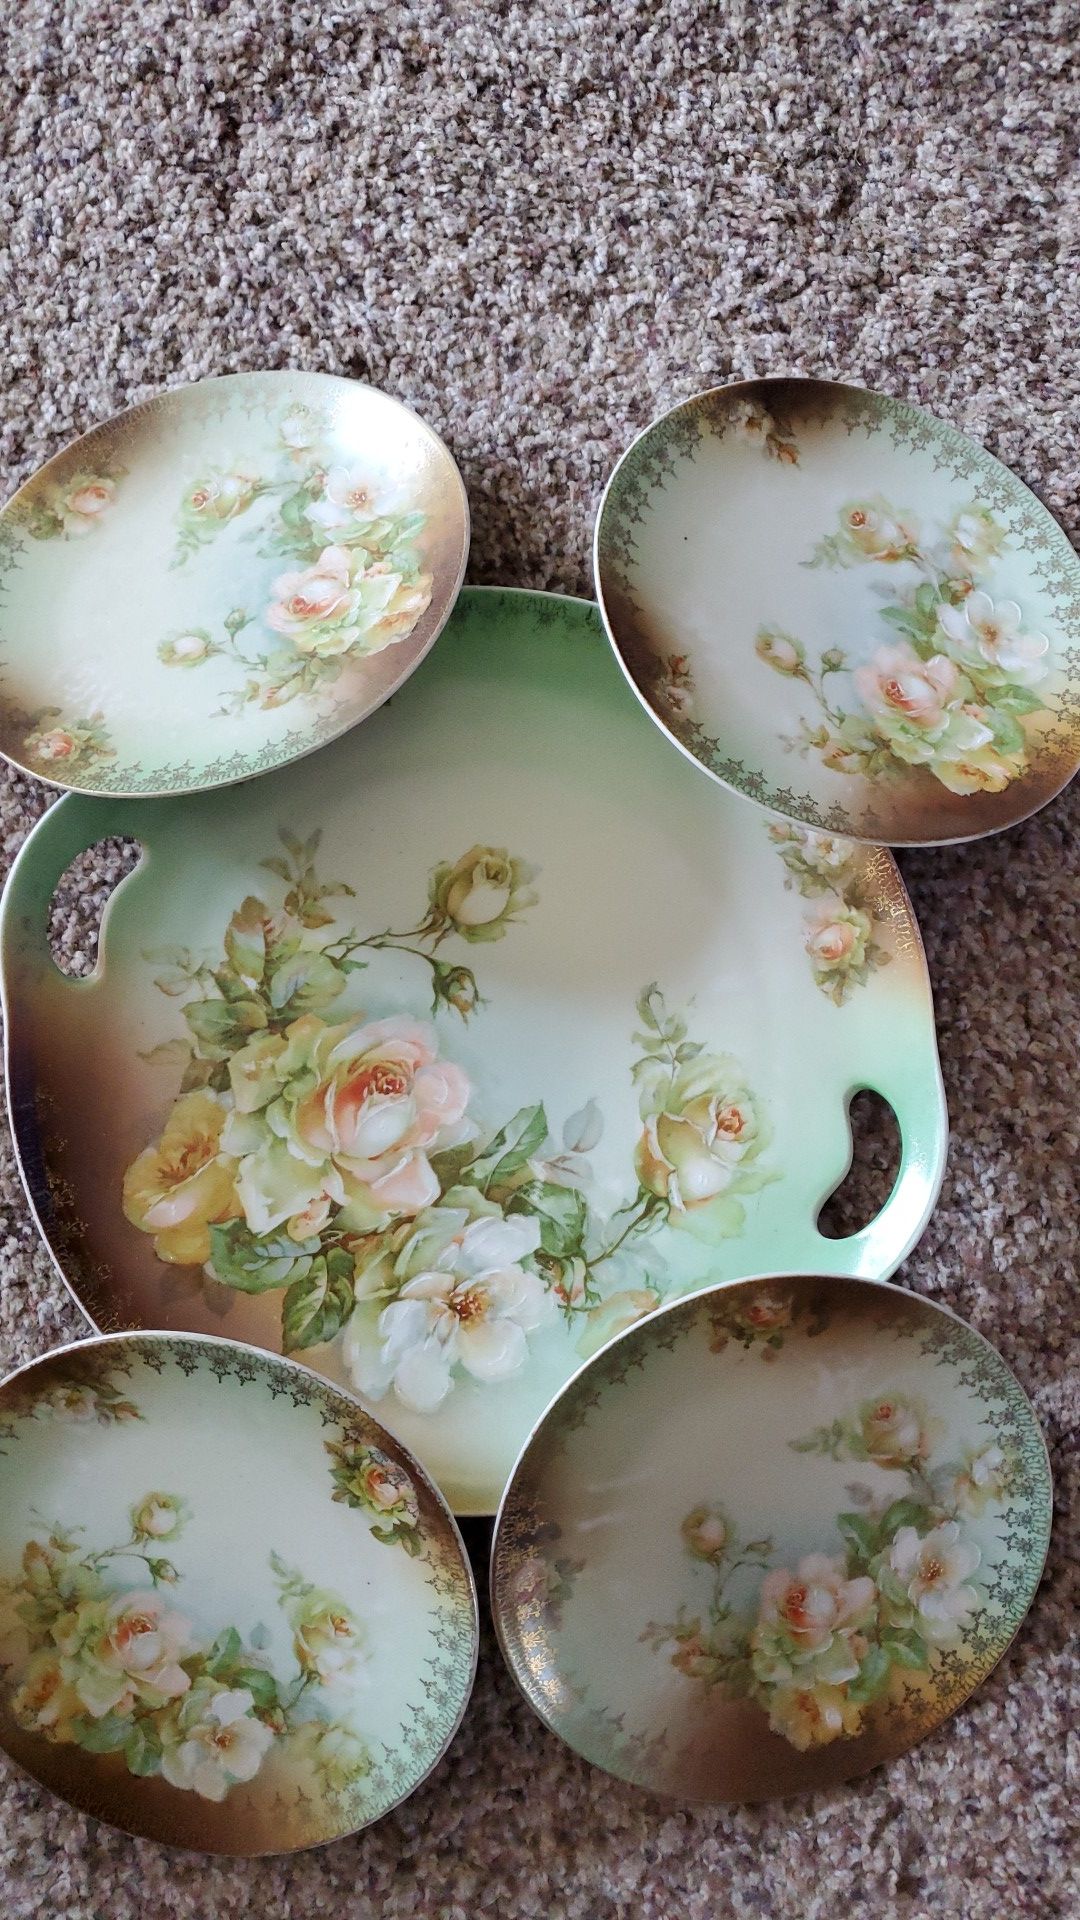 Vintage serving plate and small plates